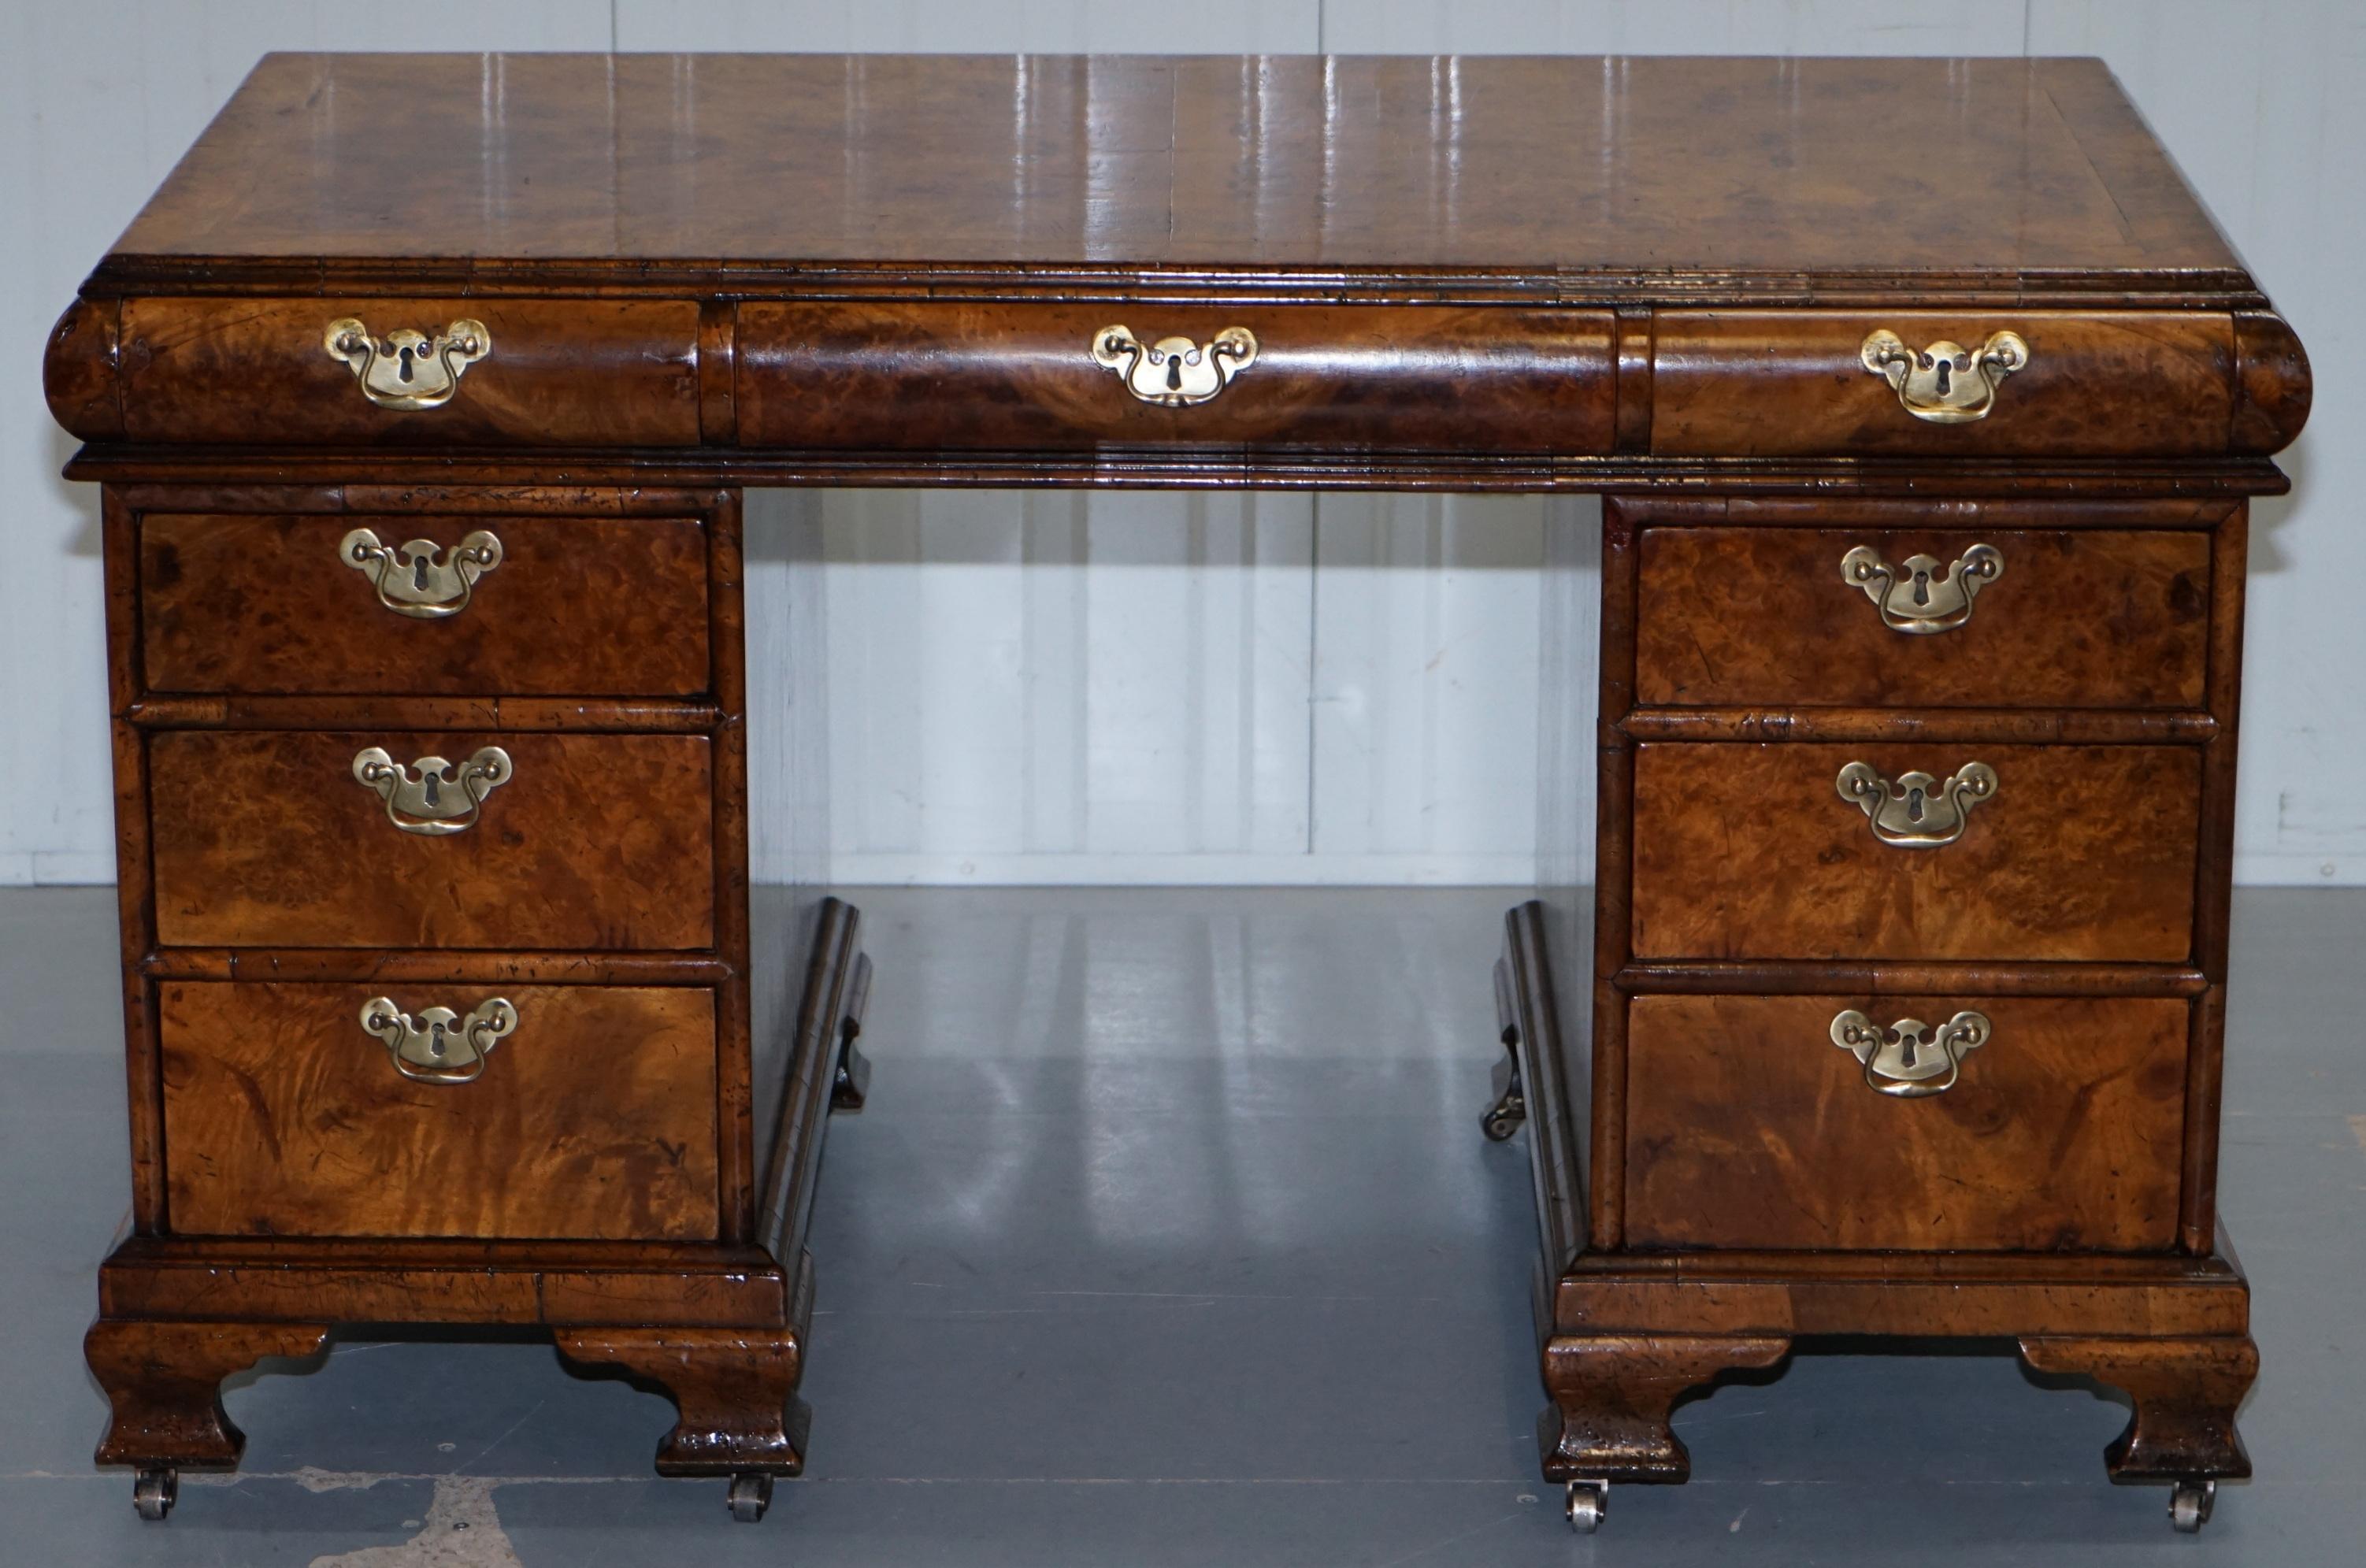 We are delighted to offer for sale this very rare circa 1815 Regency partner desk is glorious burl walnut

This desk is a tour de force of style class and design, its beautifully curved on all sides, the burl or burr (depending which part of the